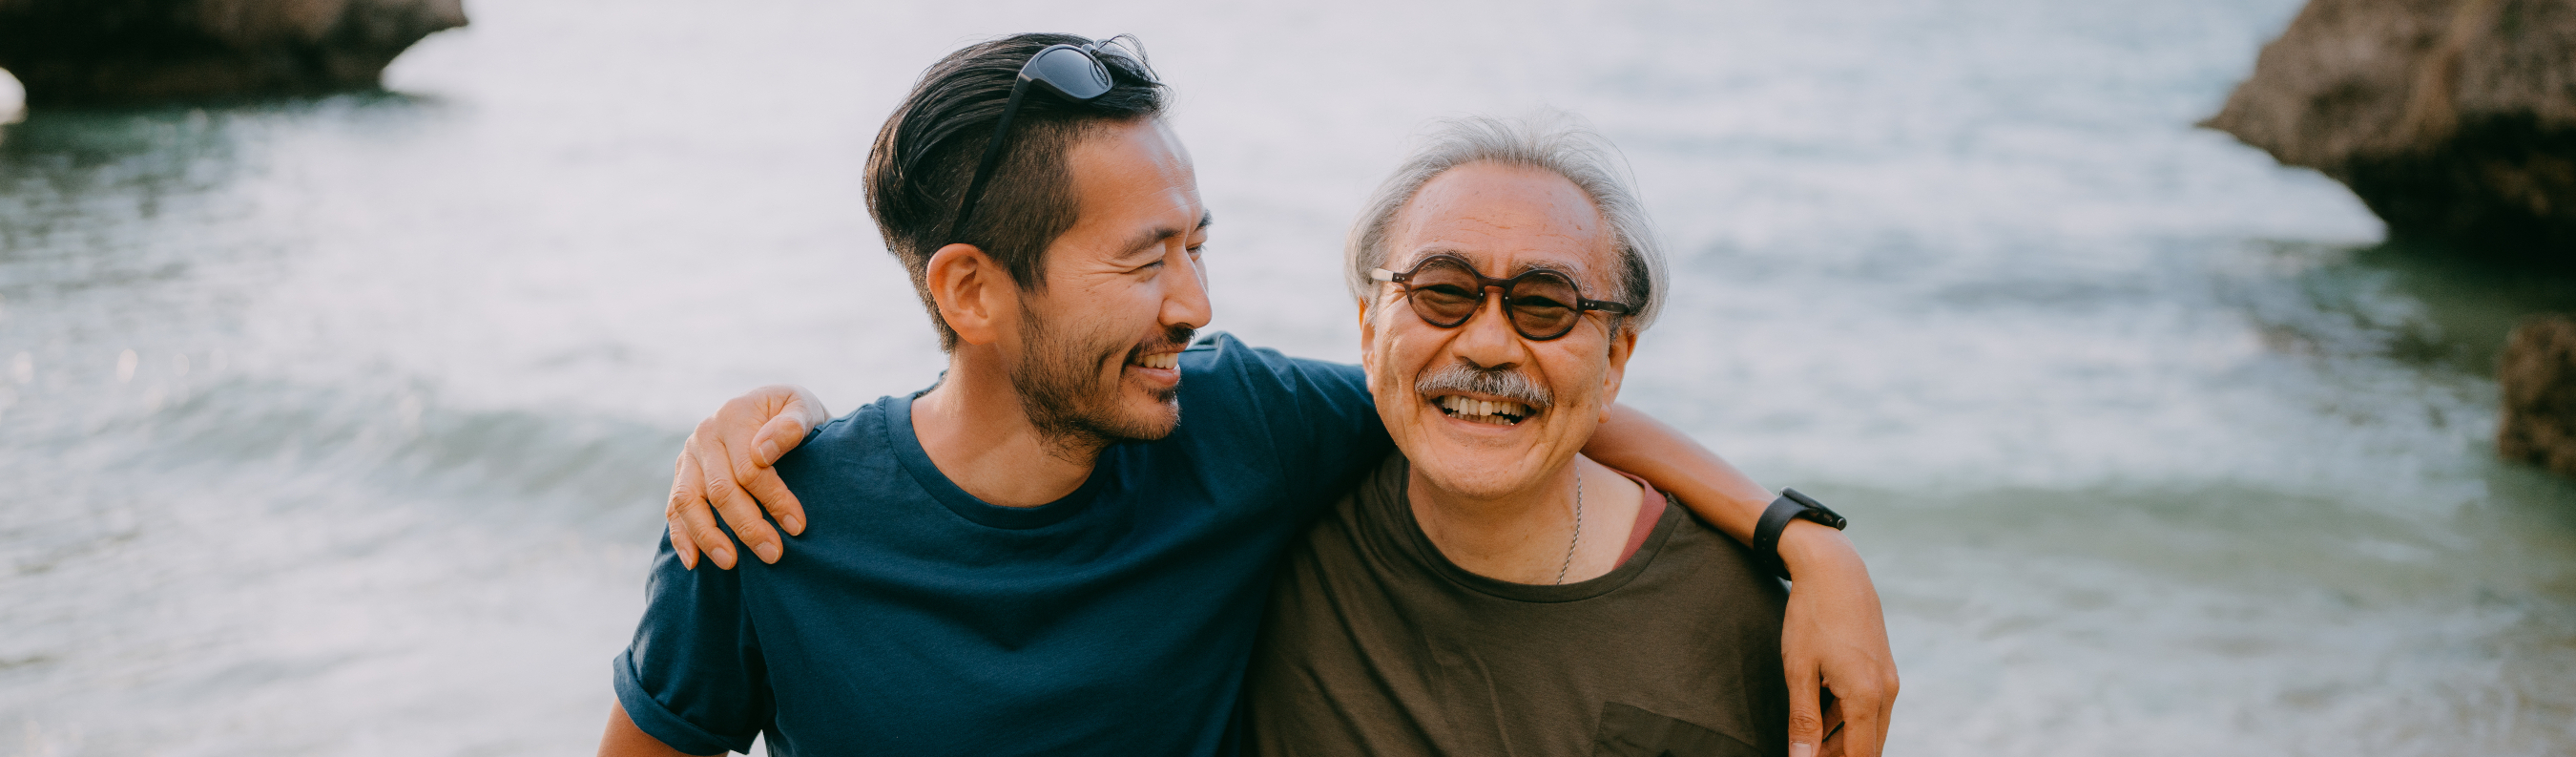 An elderly Asian father wearing glasses and a brown shirt and his adult son wearing sunglasses and a teal shirt smile side-by-side with their arms around each other. They are standing on a beach with the water and rocks in the background on a sunny day.